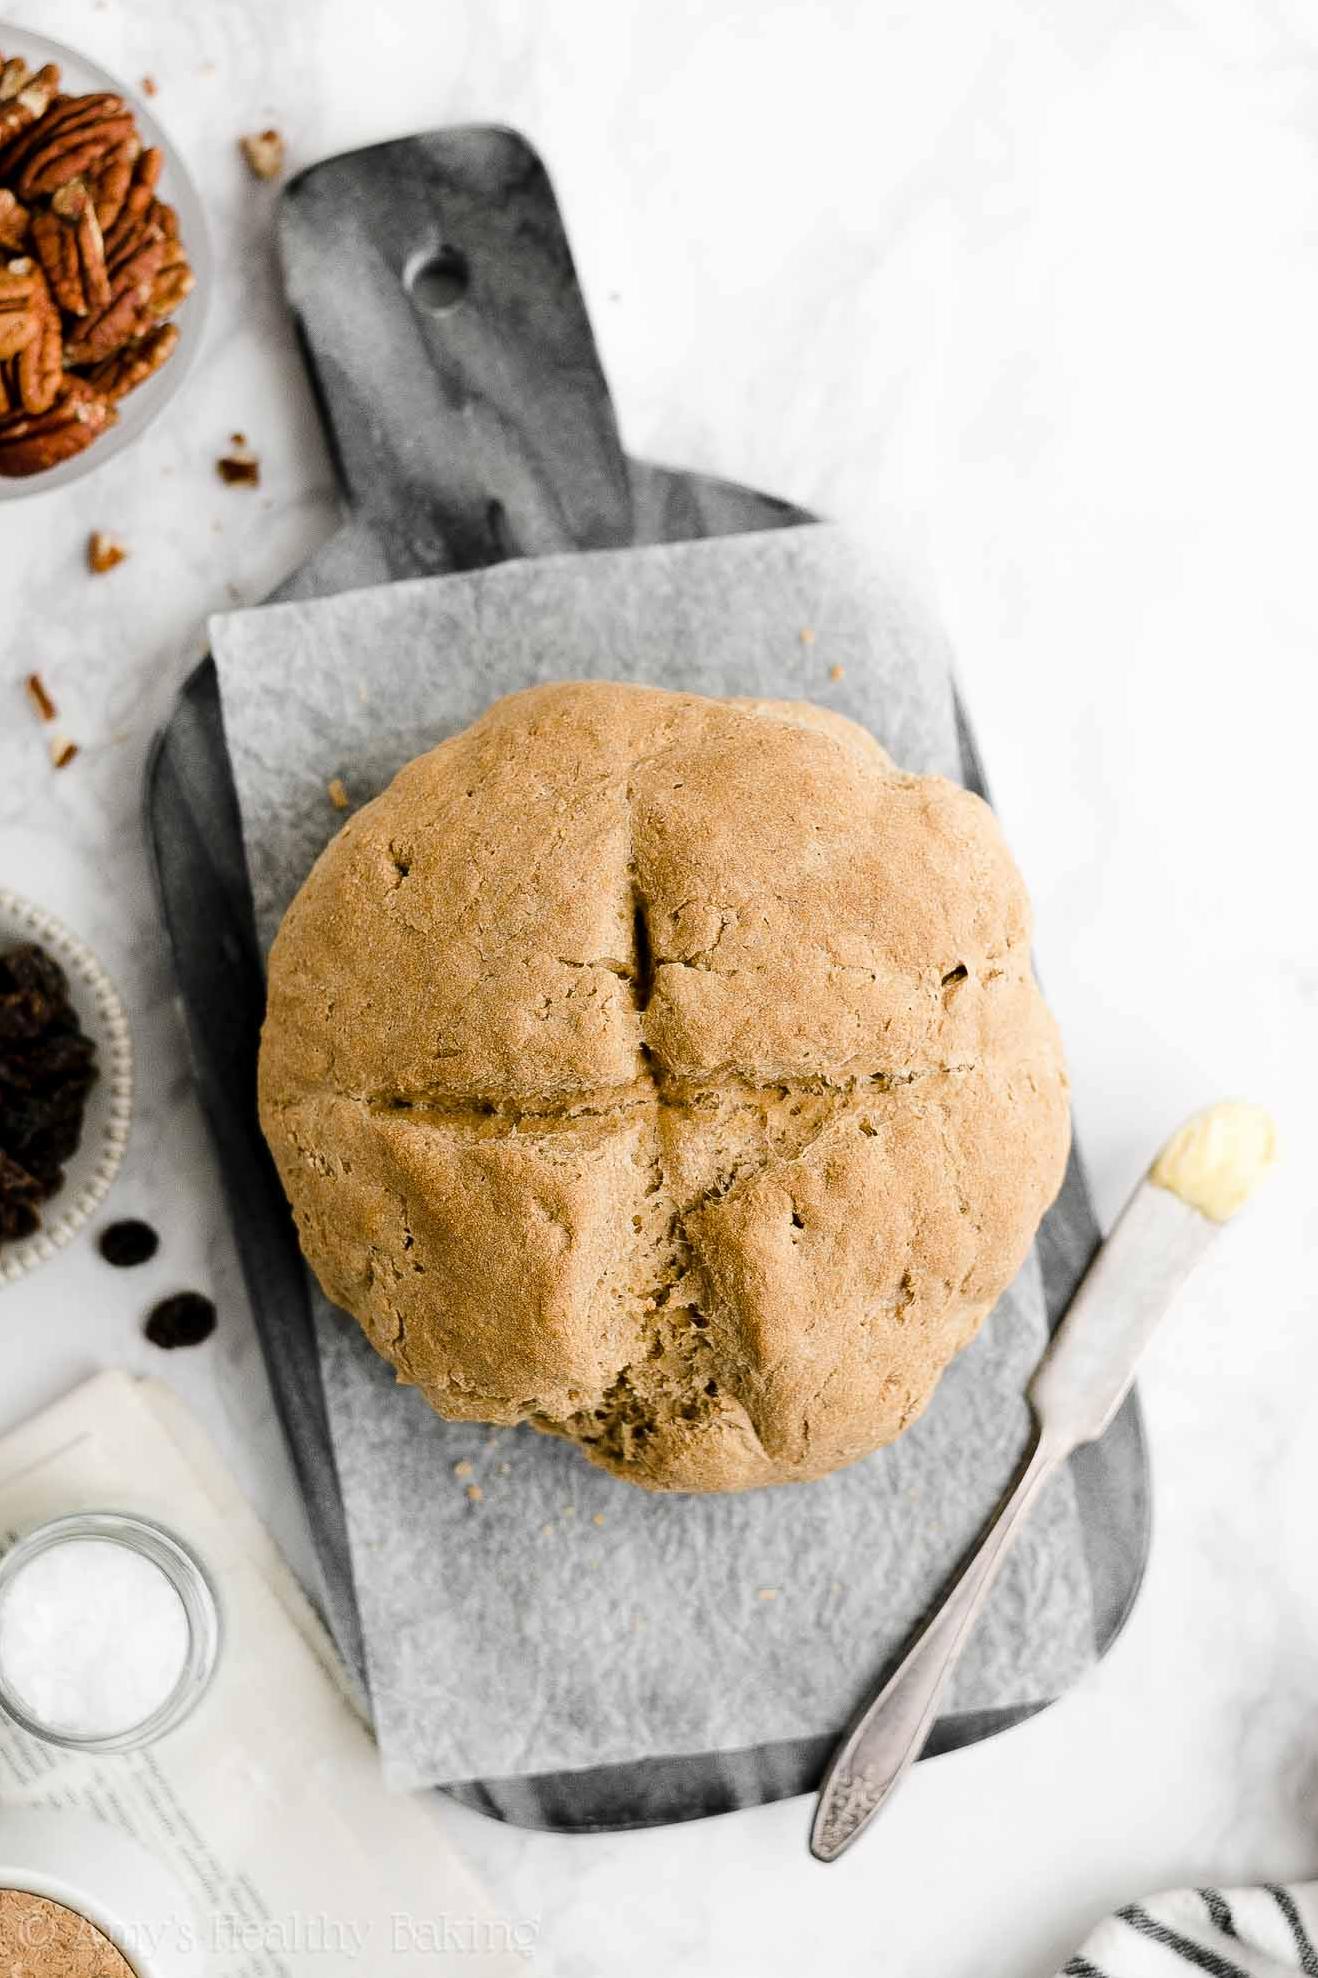  One bite and you'll be hooked on this wholesome soda bread.